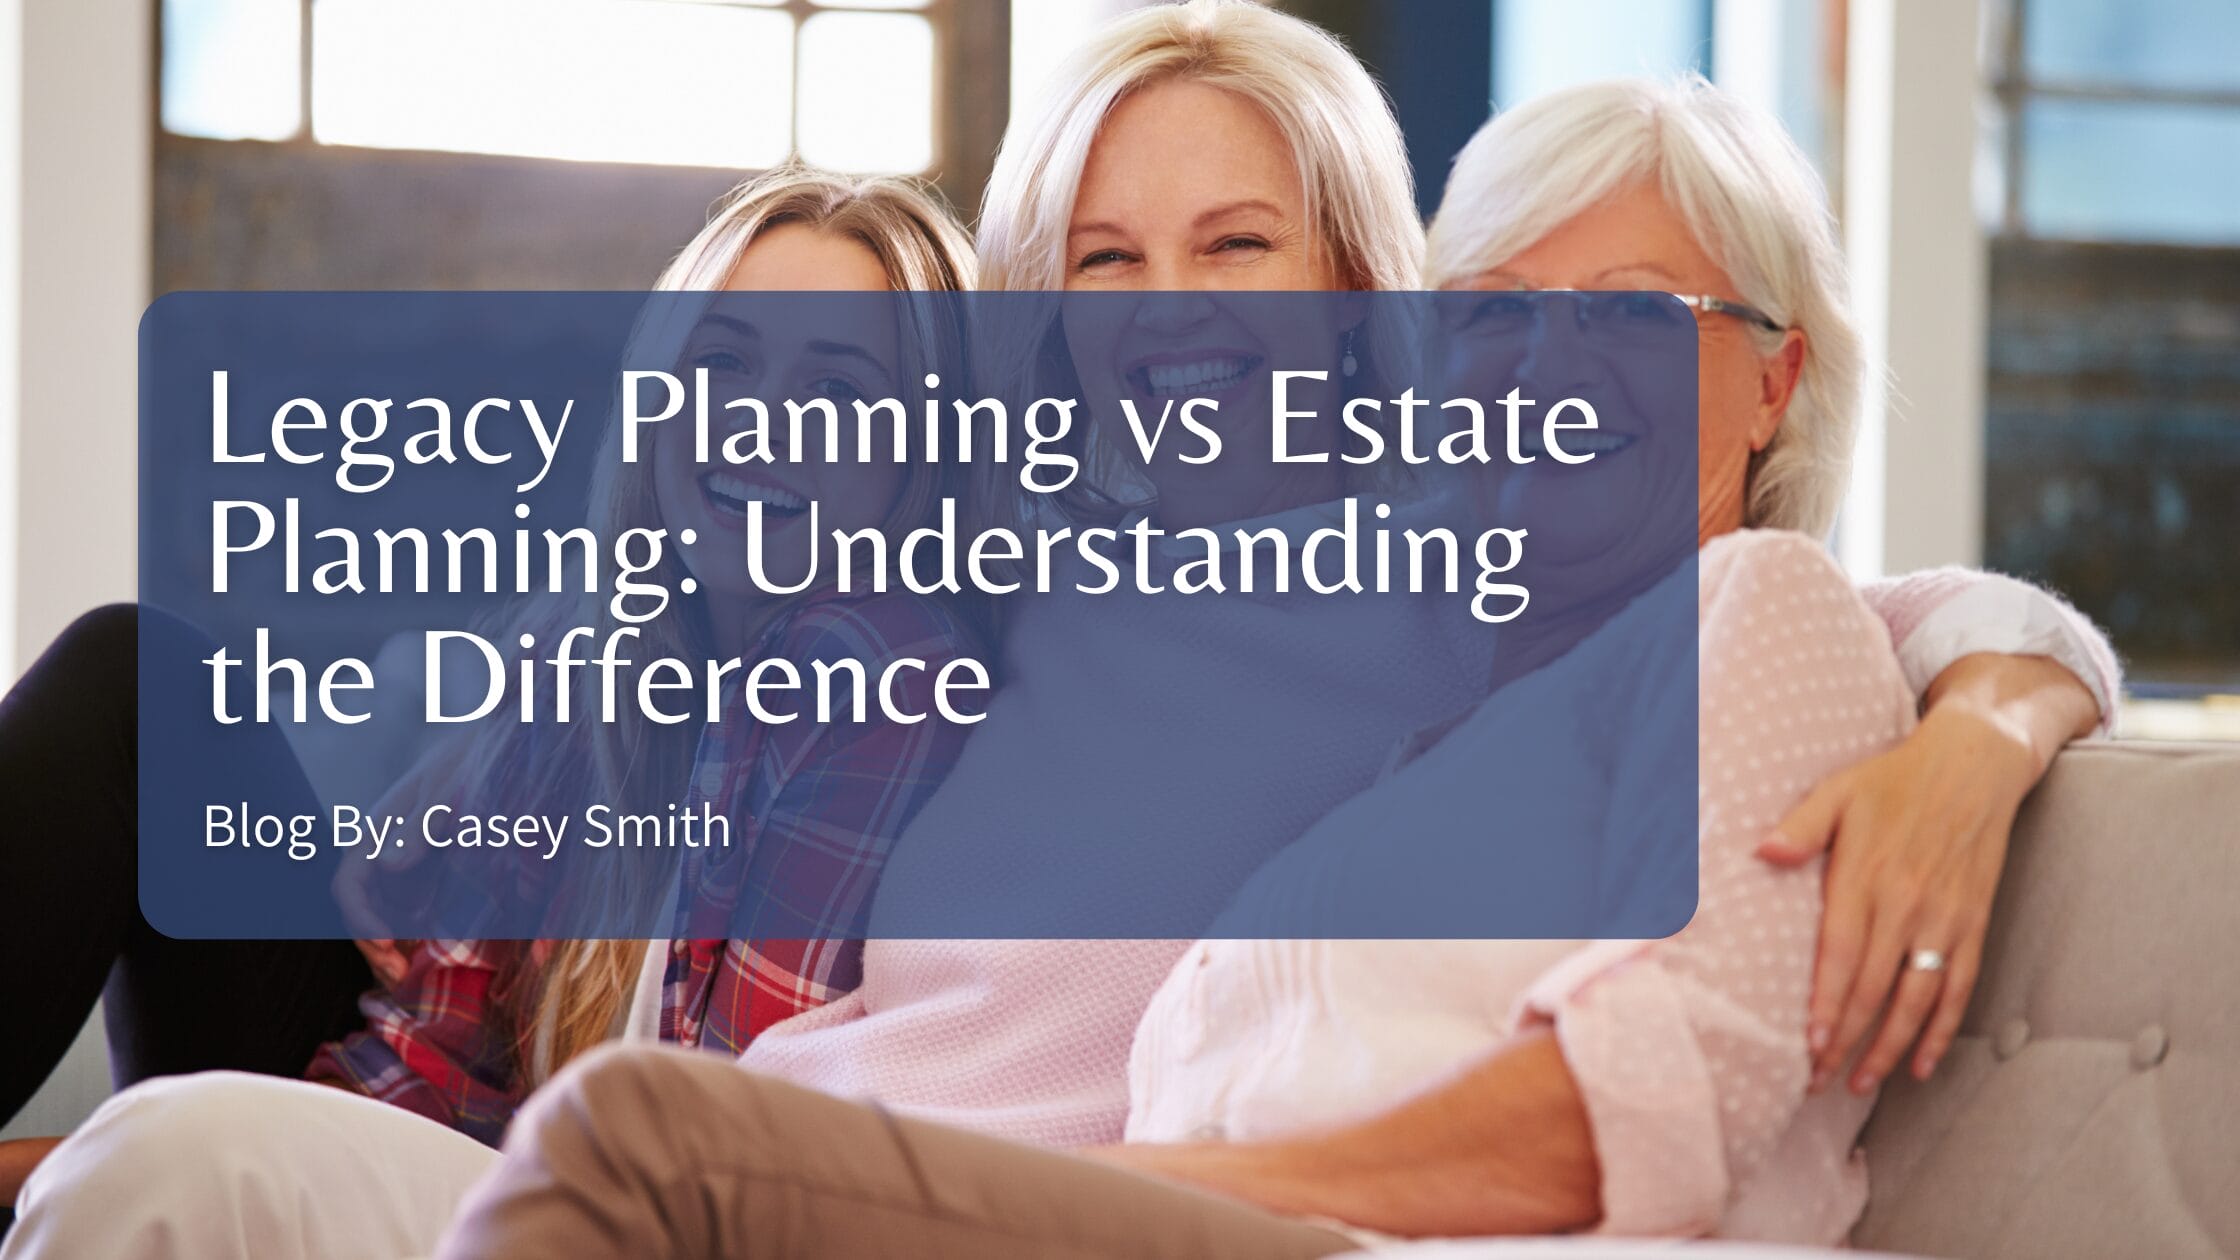 Legacy Planning vs. Estate Planning: Understanding the Difference